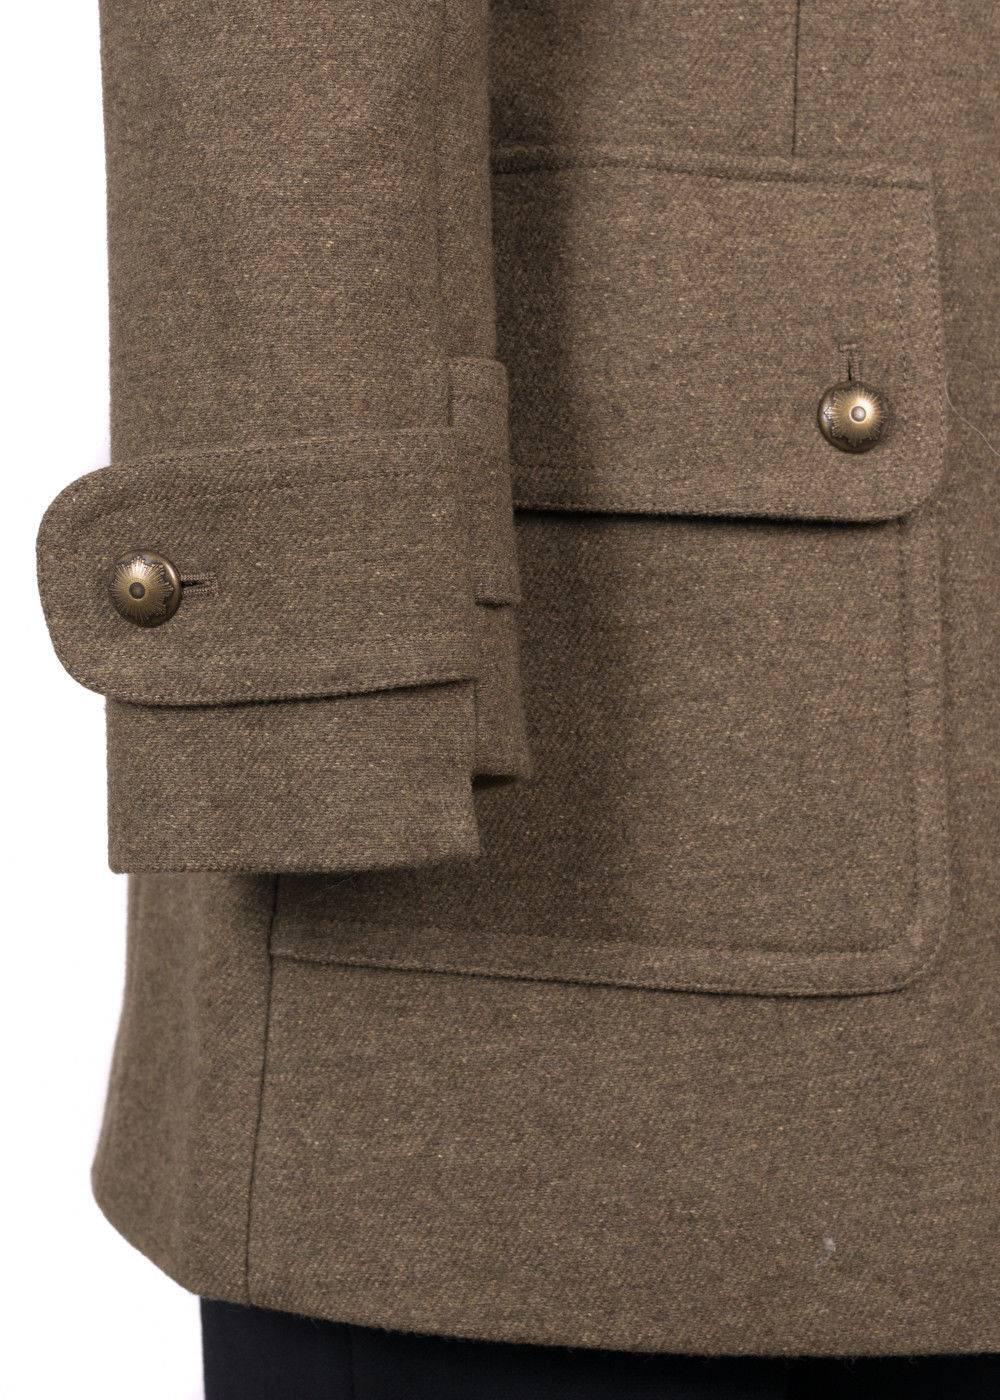 Brand New Women's Maison Margiela Military Coat
Original with Tags
Retails in Stores & Online for $3575
Size EUR 42 / USA 6

The world will stand at attention when you are in your Maison Margiela's coat. This wool blend beauty was designed with